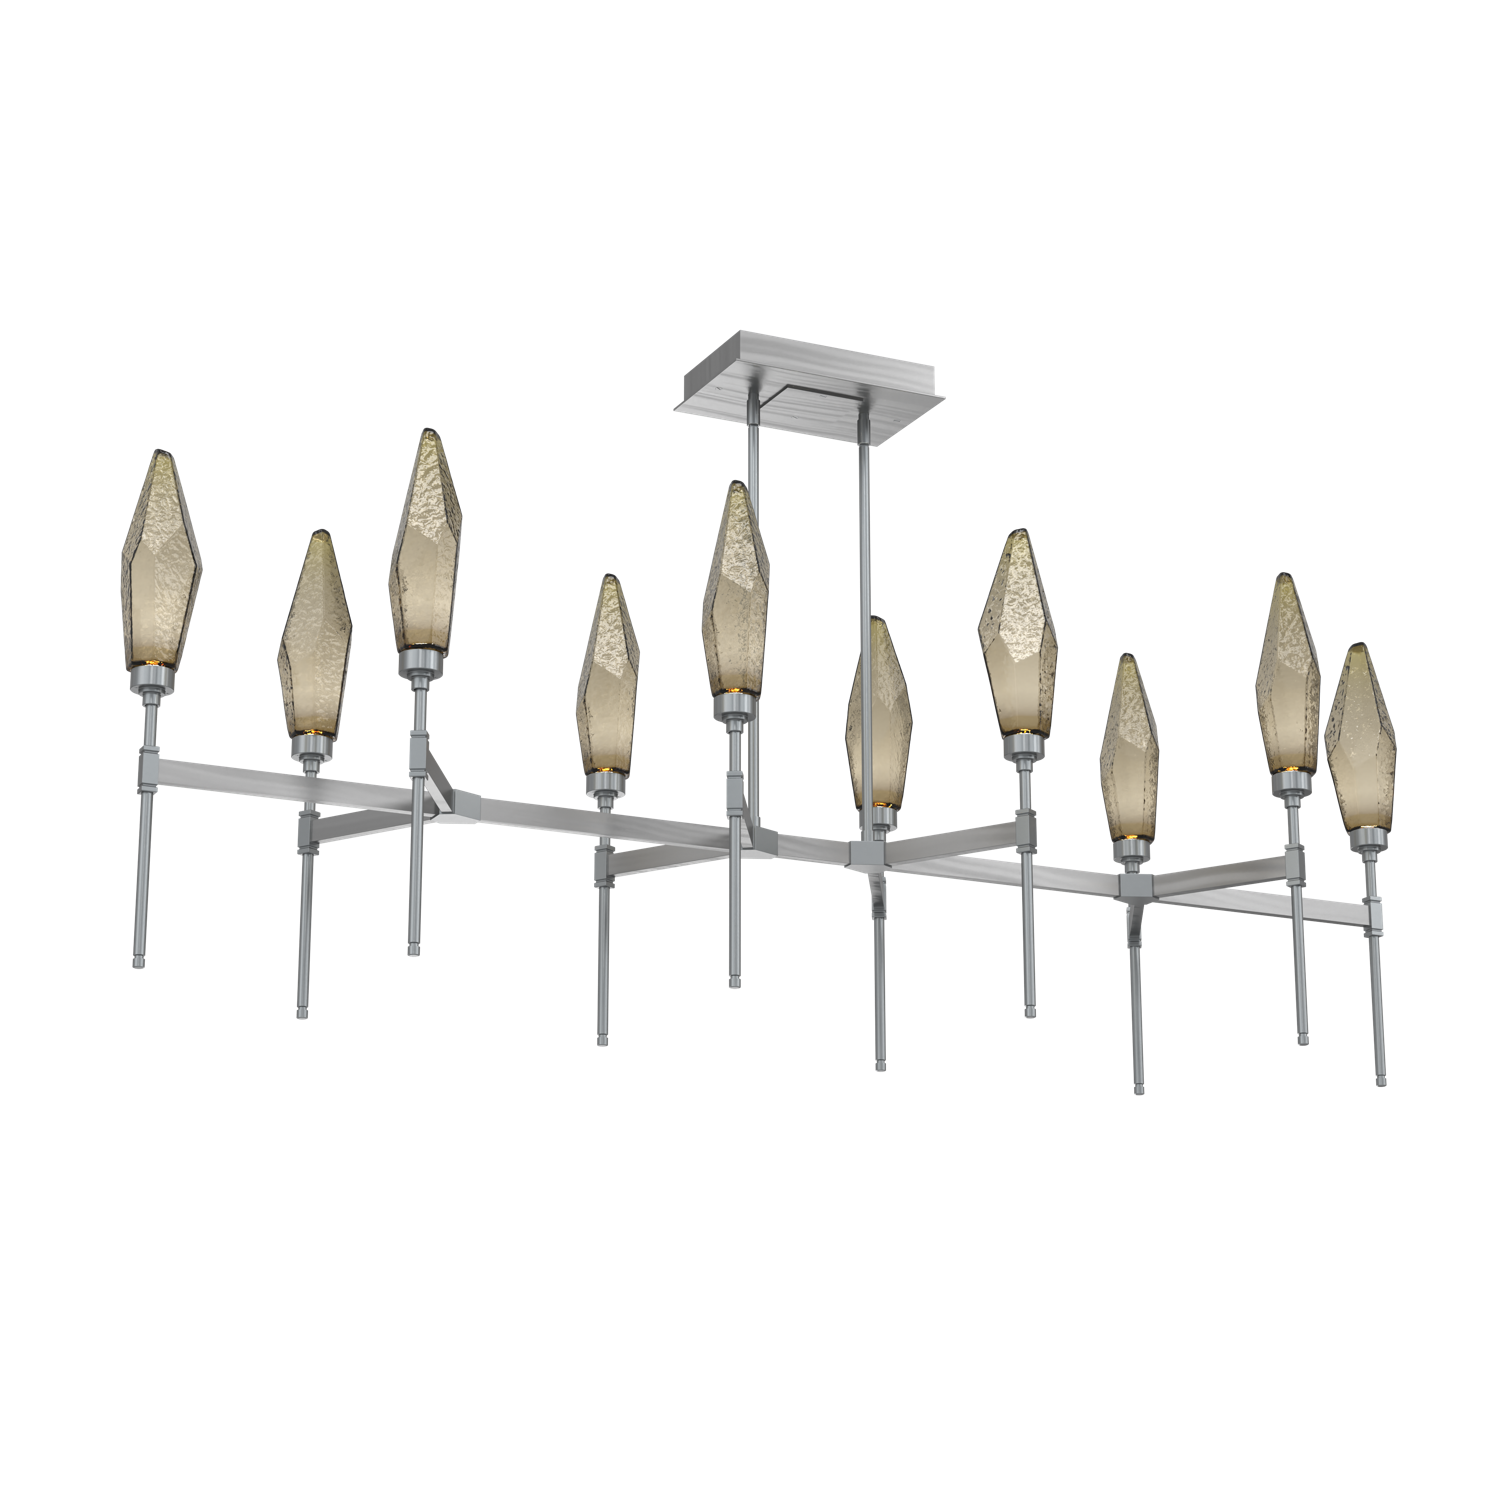 PLB0050-67-SN-CB-Hammerton-Studio-Rock-Crystal-67-inch-linear-belvedere-chandelier-with-satin-nickel-finish-and-chilled-bronze-blown-glass-shades-and-LED-lamping